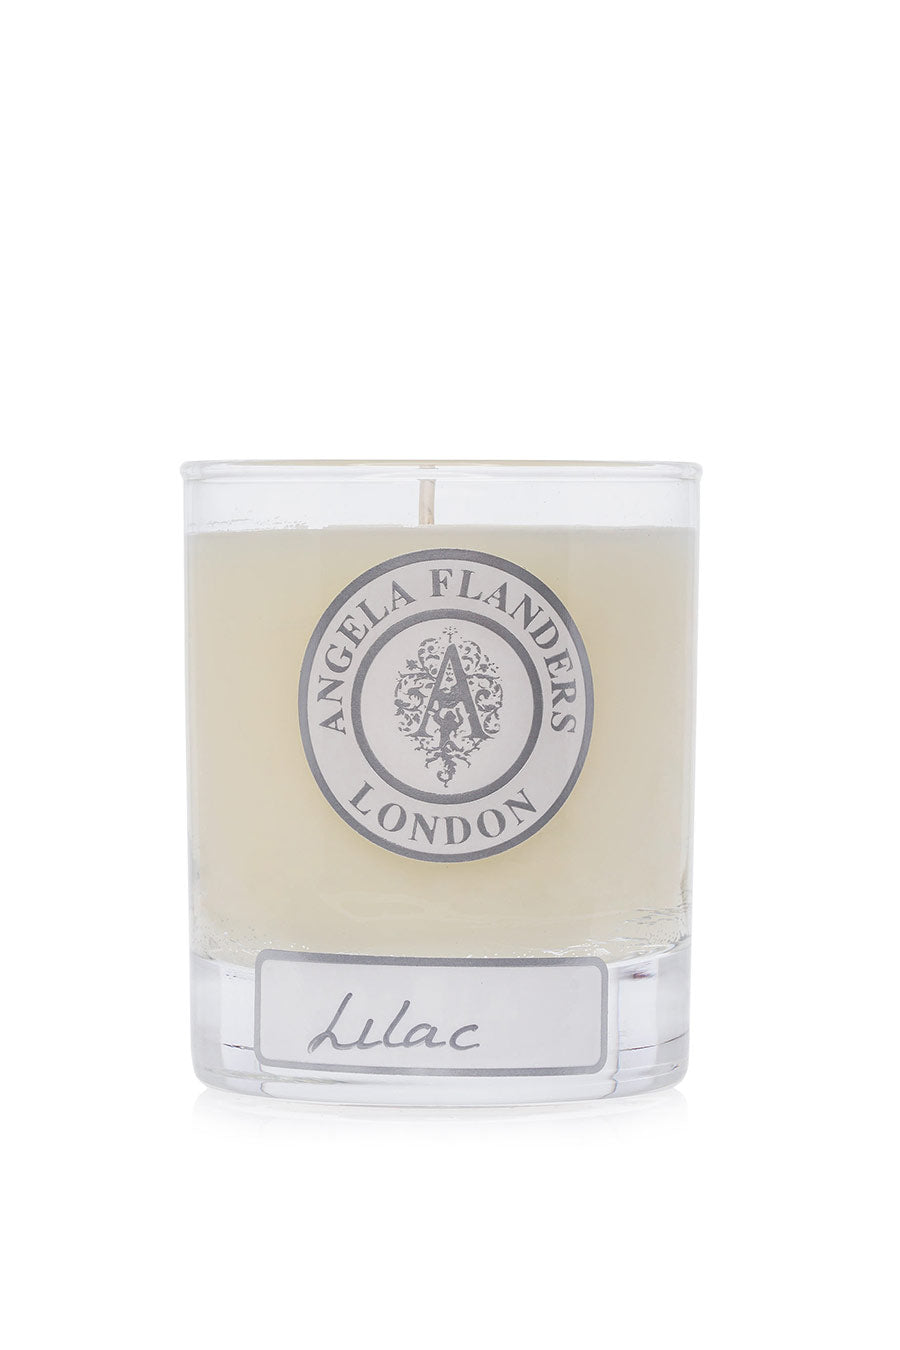 Angela Flanders White Lilac Candle